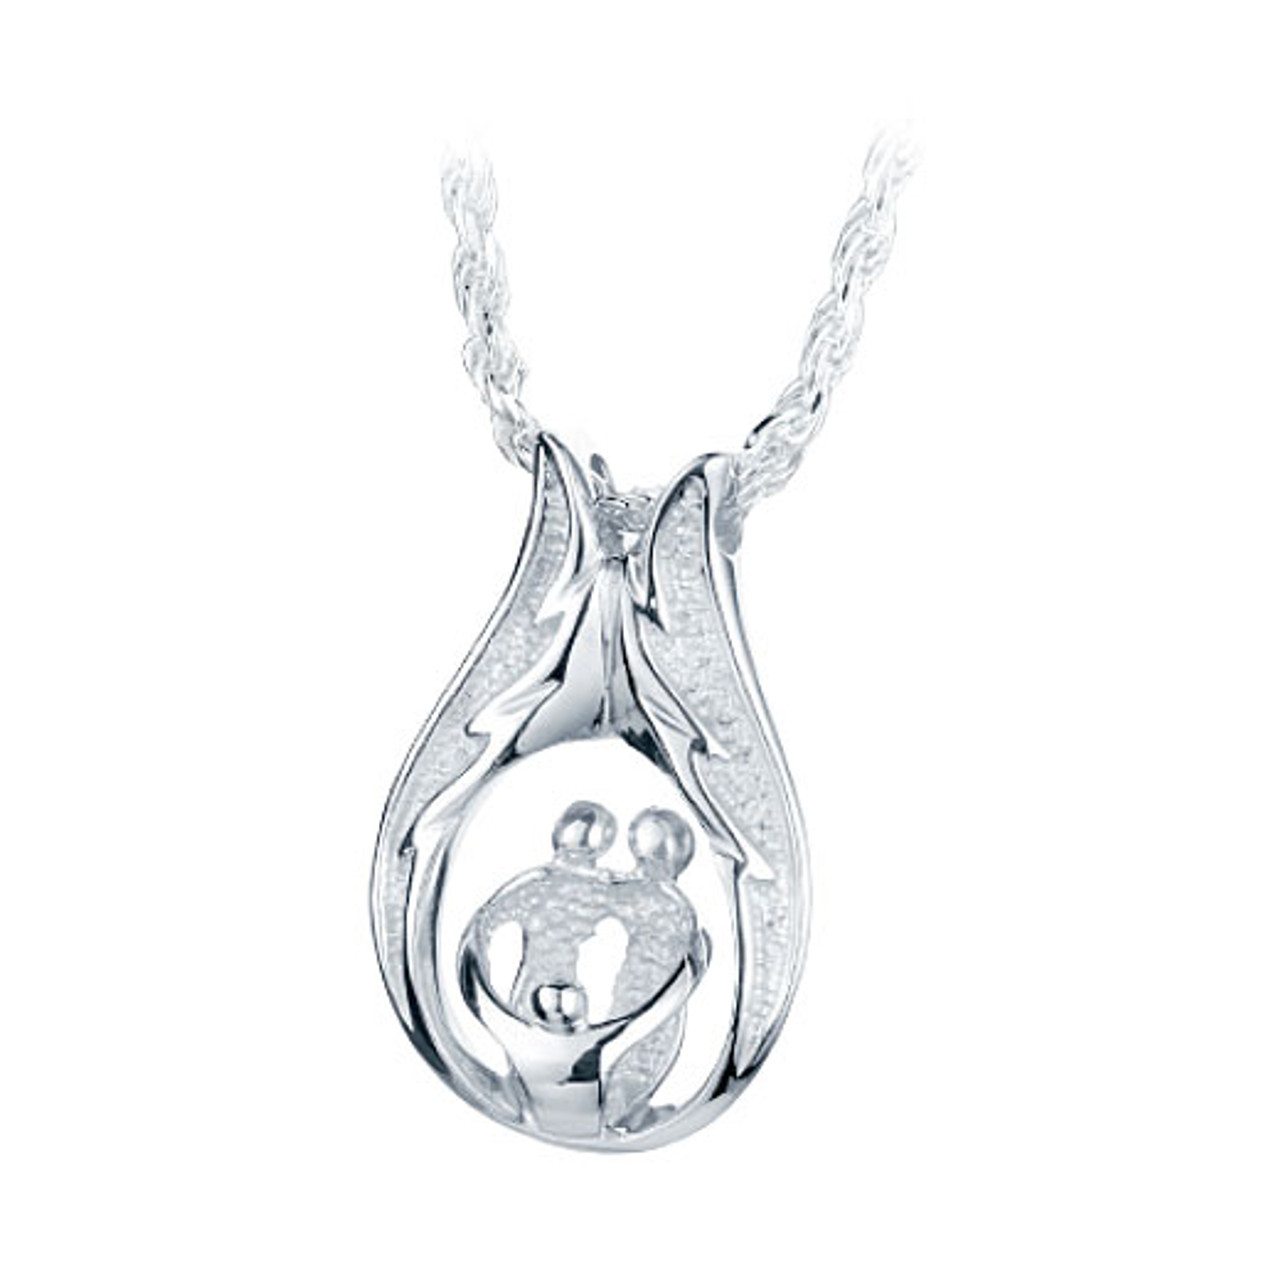 Sterling Silver Pendant Lockets with One or Two Pictures or Photos Inserted  Inside for You and Protected Under a Resin